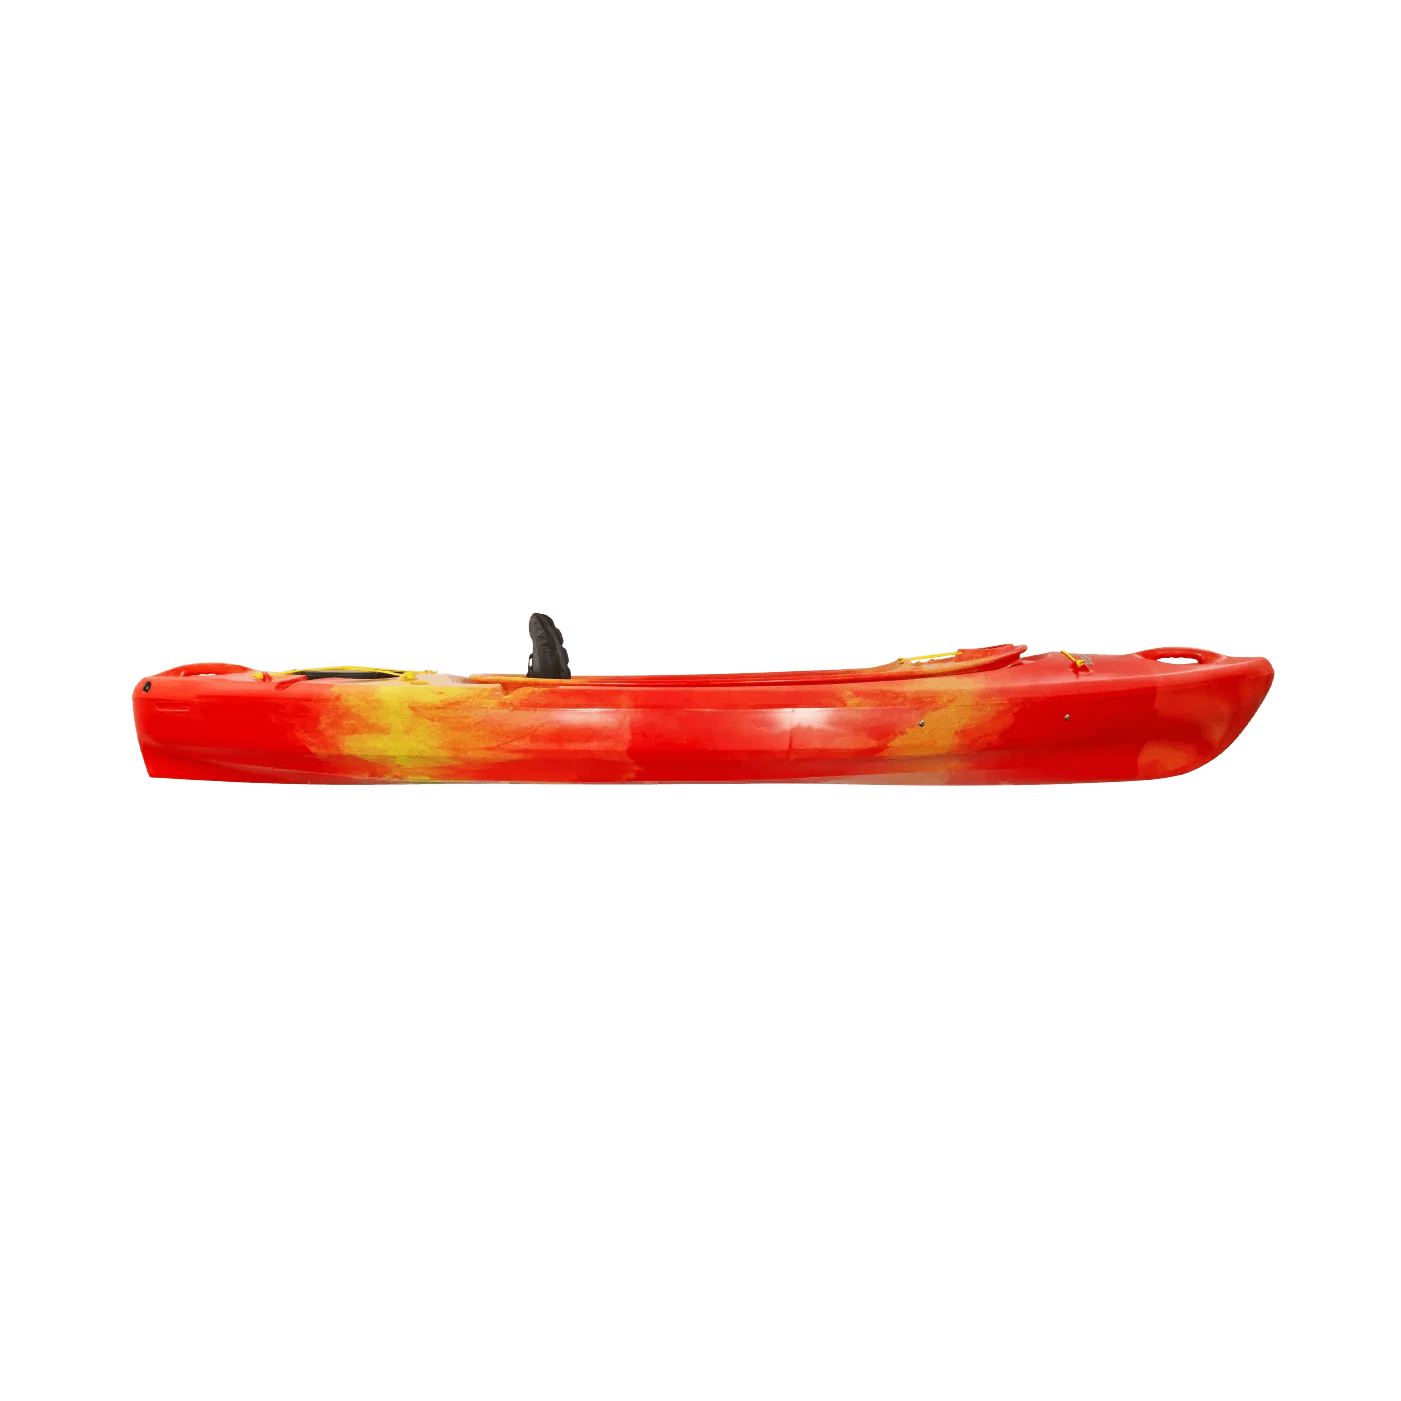 PERCEPTION - Drift 9.5 Recreational Kayak - Discontinued color/model - Red - 9331840042 - SIDE